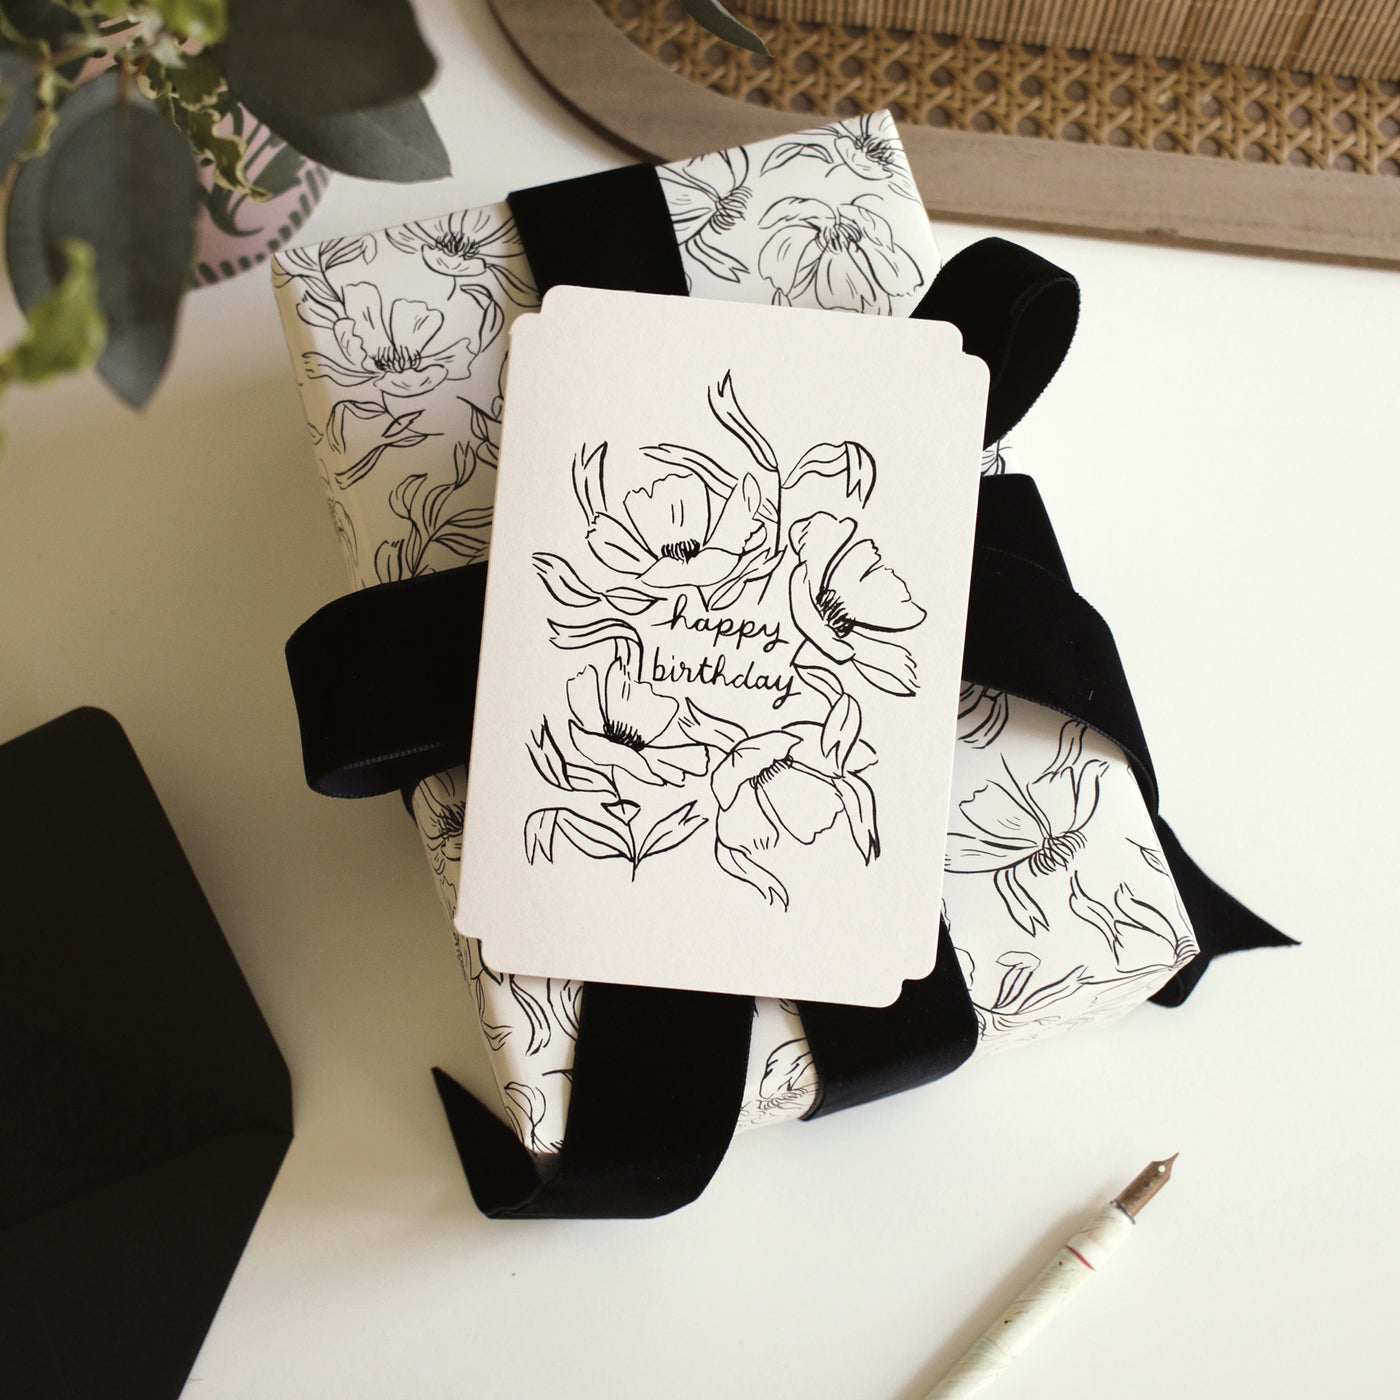 An illustrated floral birthday card sits atop a gift wrapped in matching, linework-style floral illustrations.  - Annie Dornan Smith